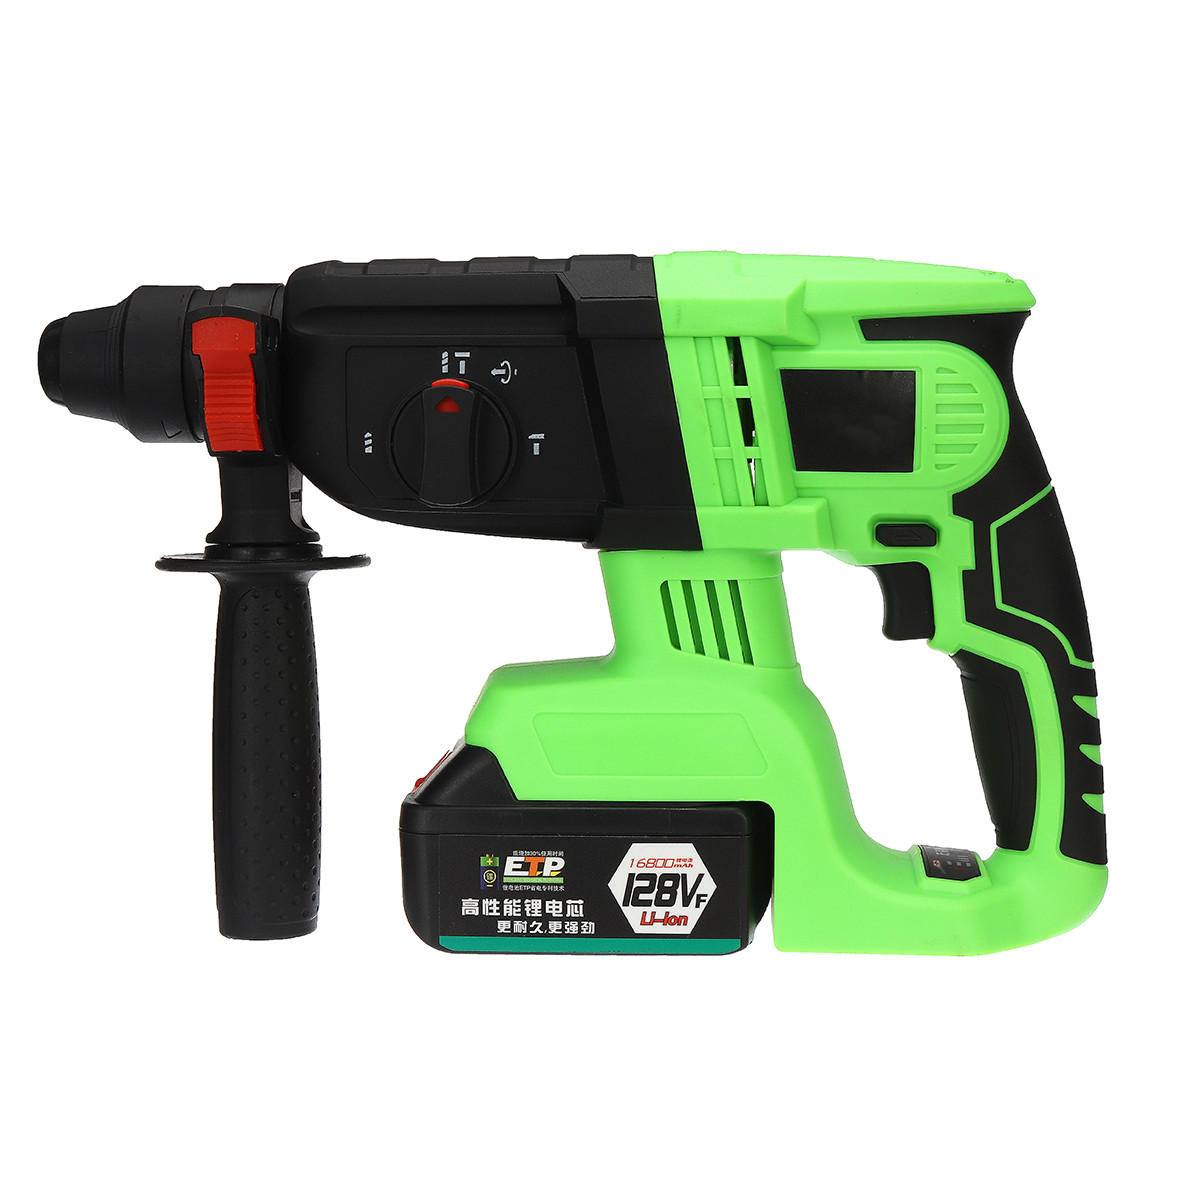 128VF 16800mAh Brushless Electric Cordless Impact Hammer High Torque Drill with Rechargeable...